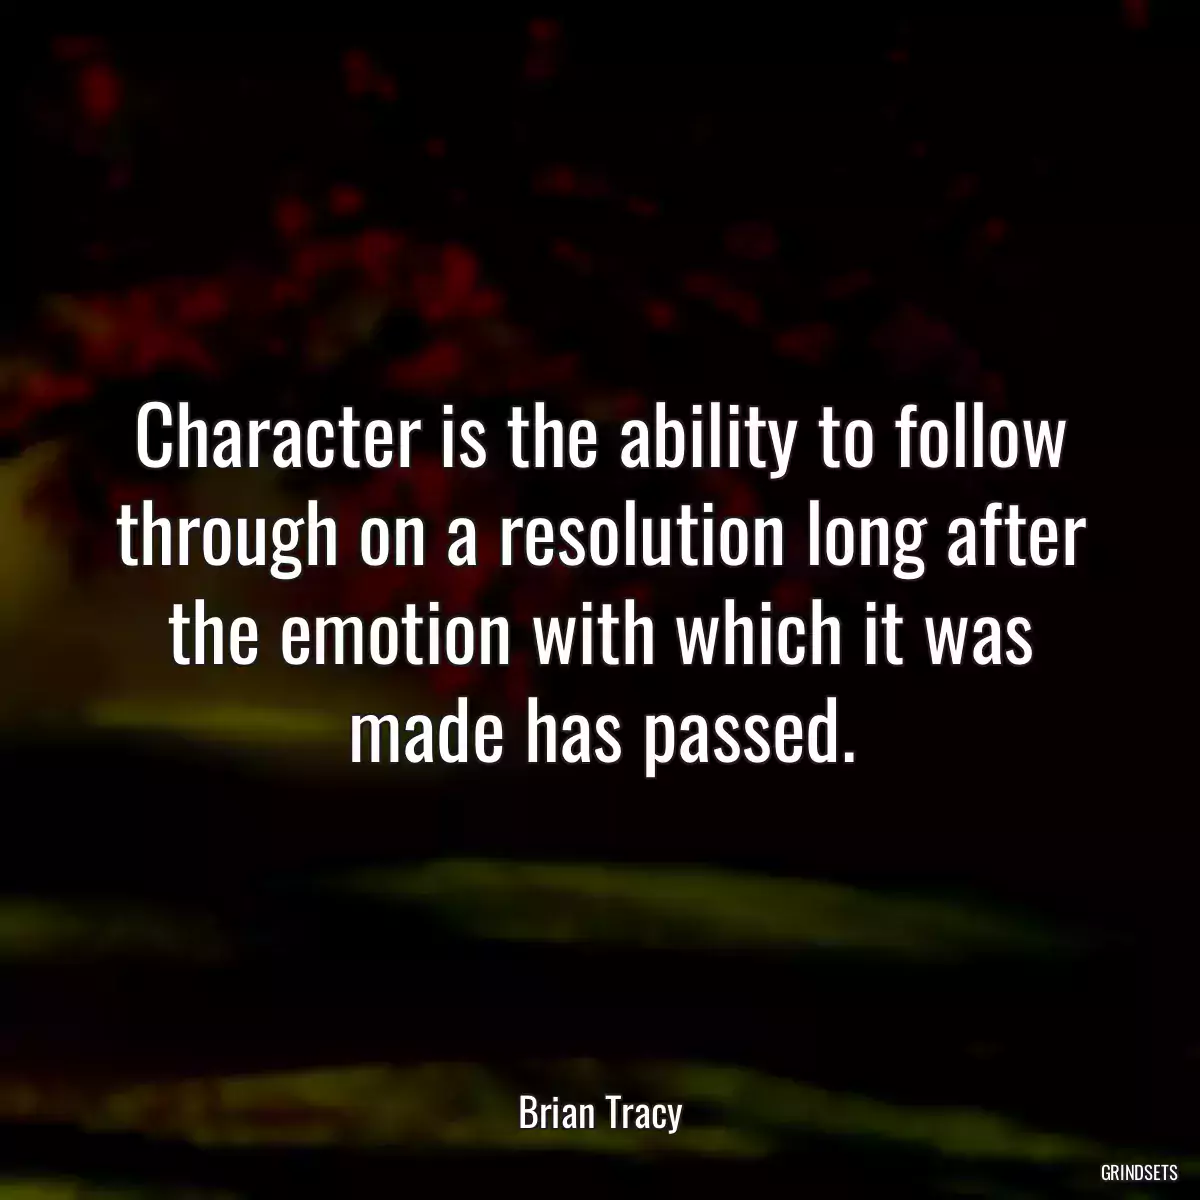 Character is the ability to follow through on a resolution long after the emotion with which it was made has passed.